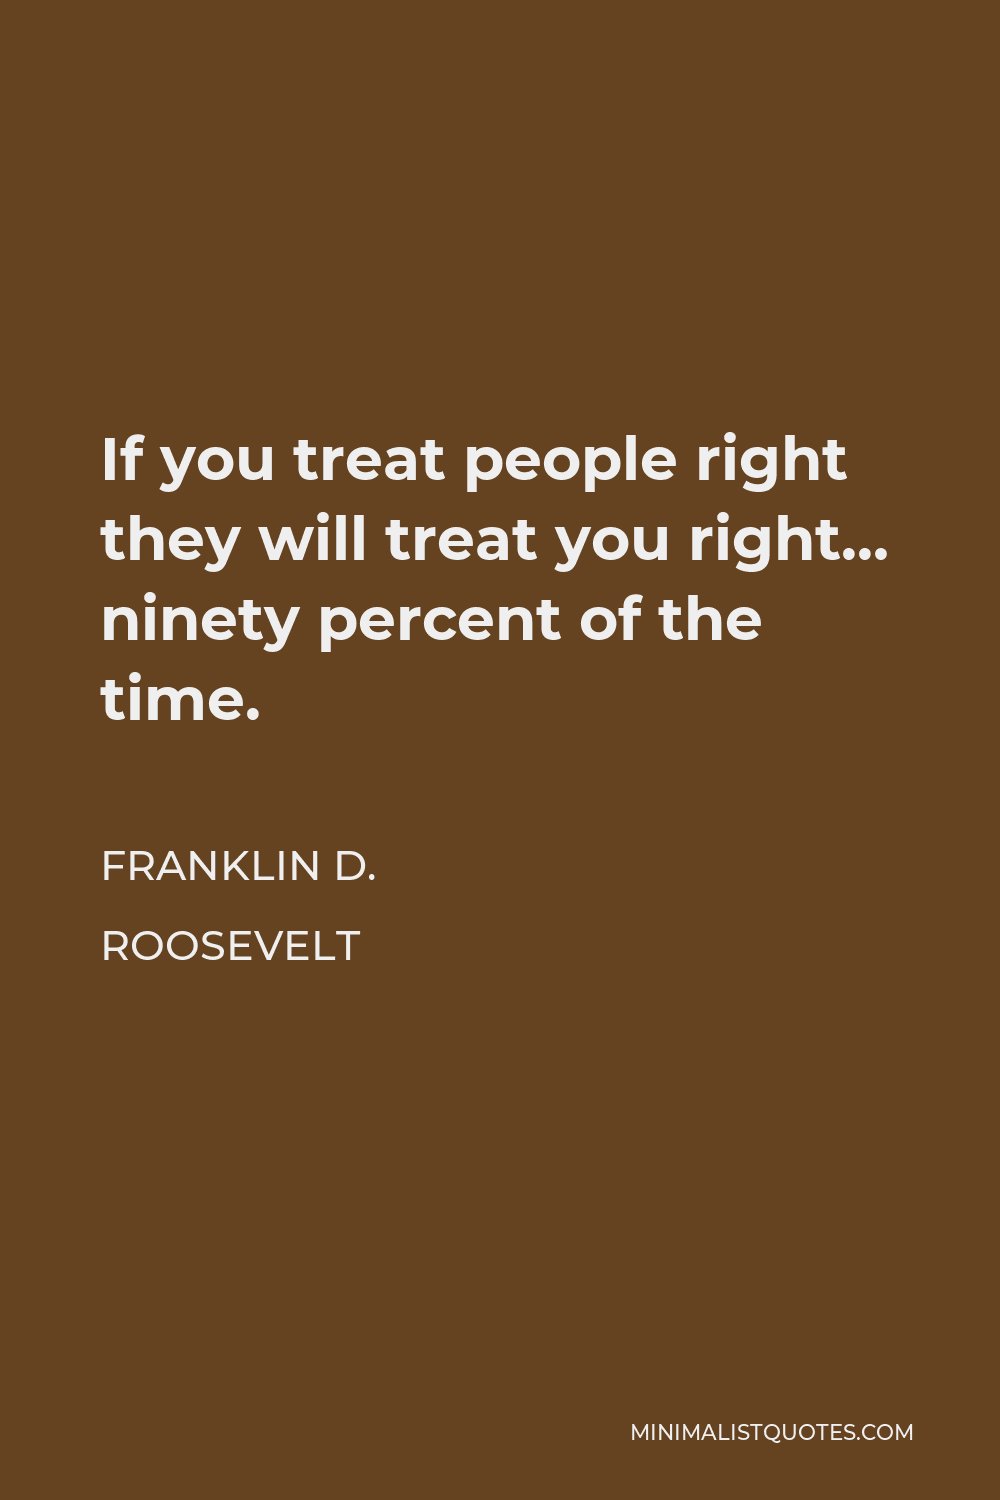 Franklin D. Roosevelt Quote - If you treat people right they will treat you right… ninety percent of the time.